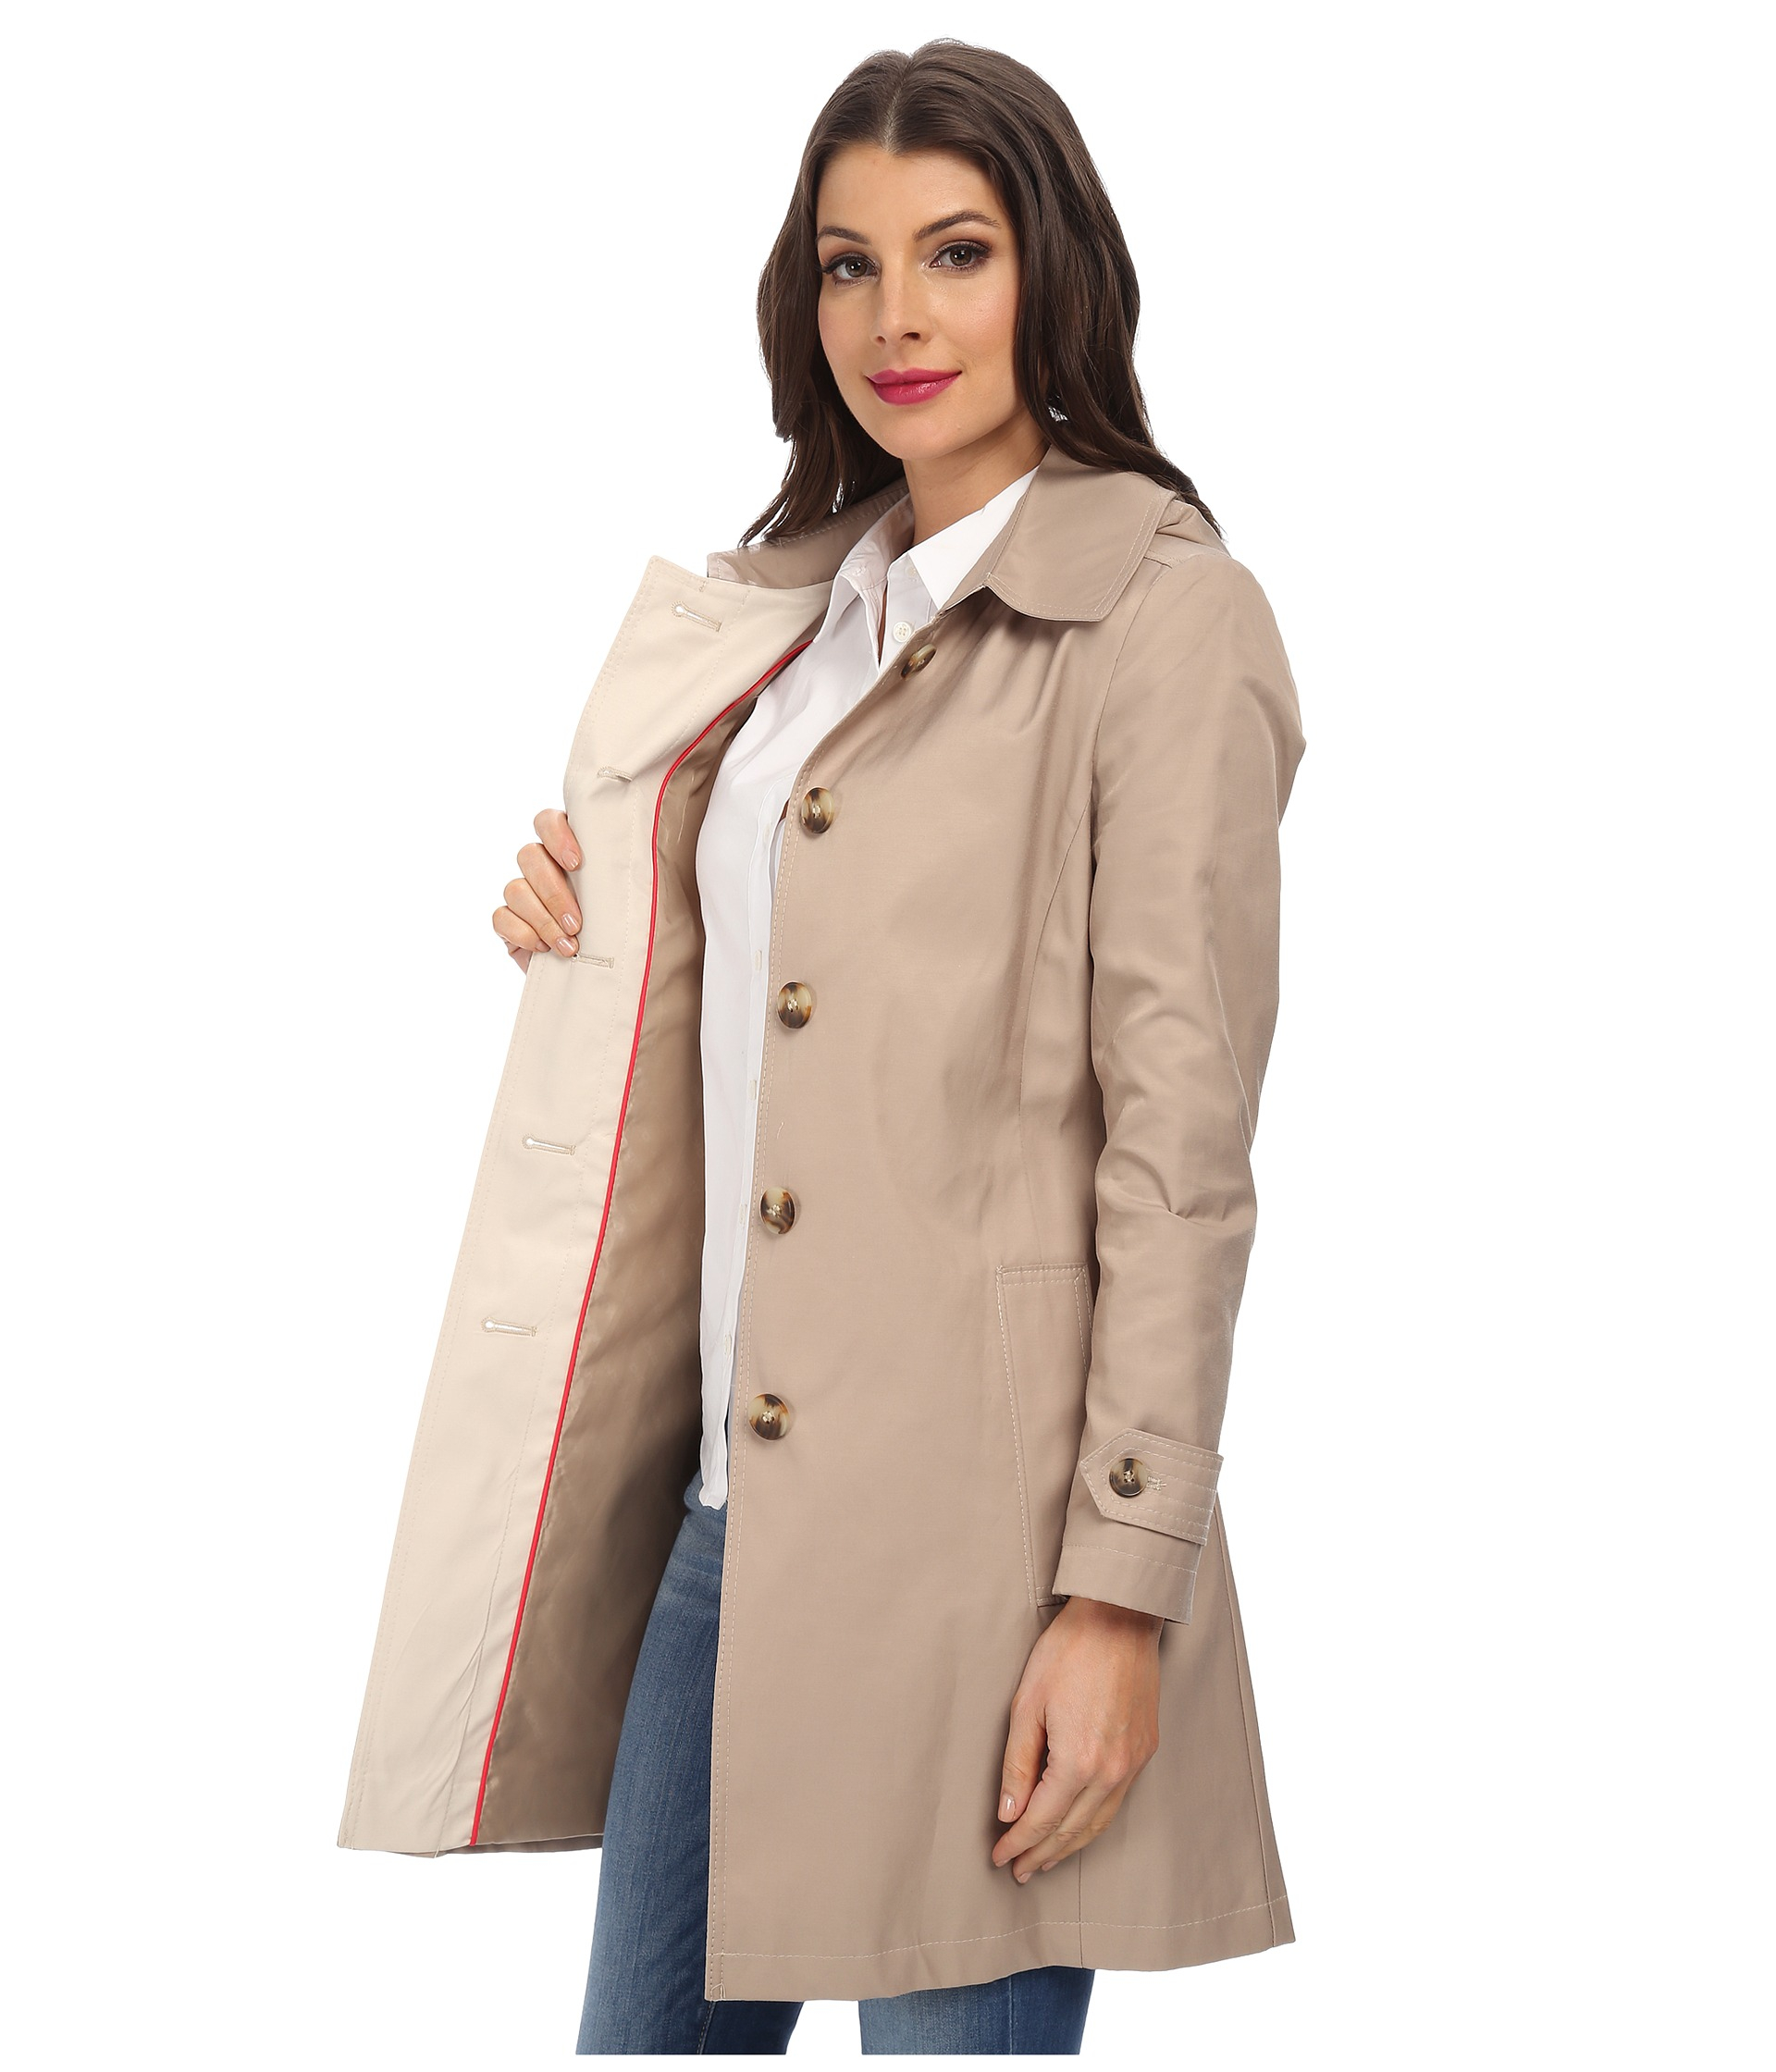 Lyst - Dkny Single Breasted Hooded Belted Trench Coat in Natural